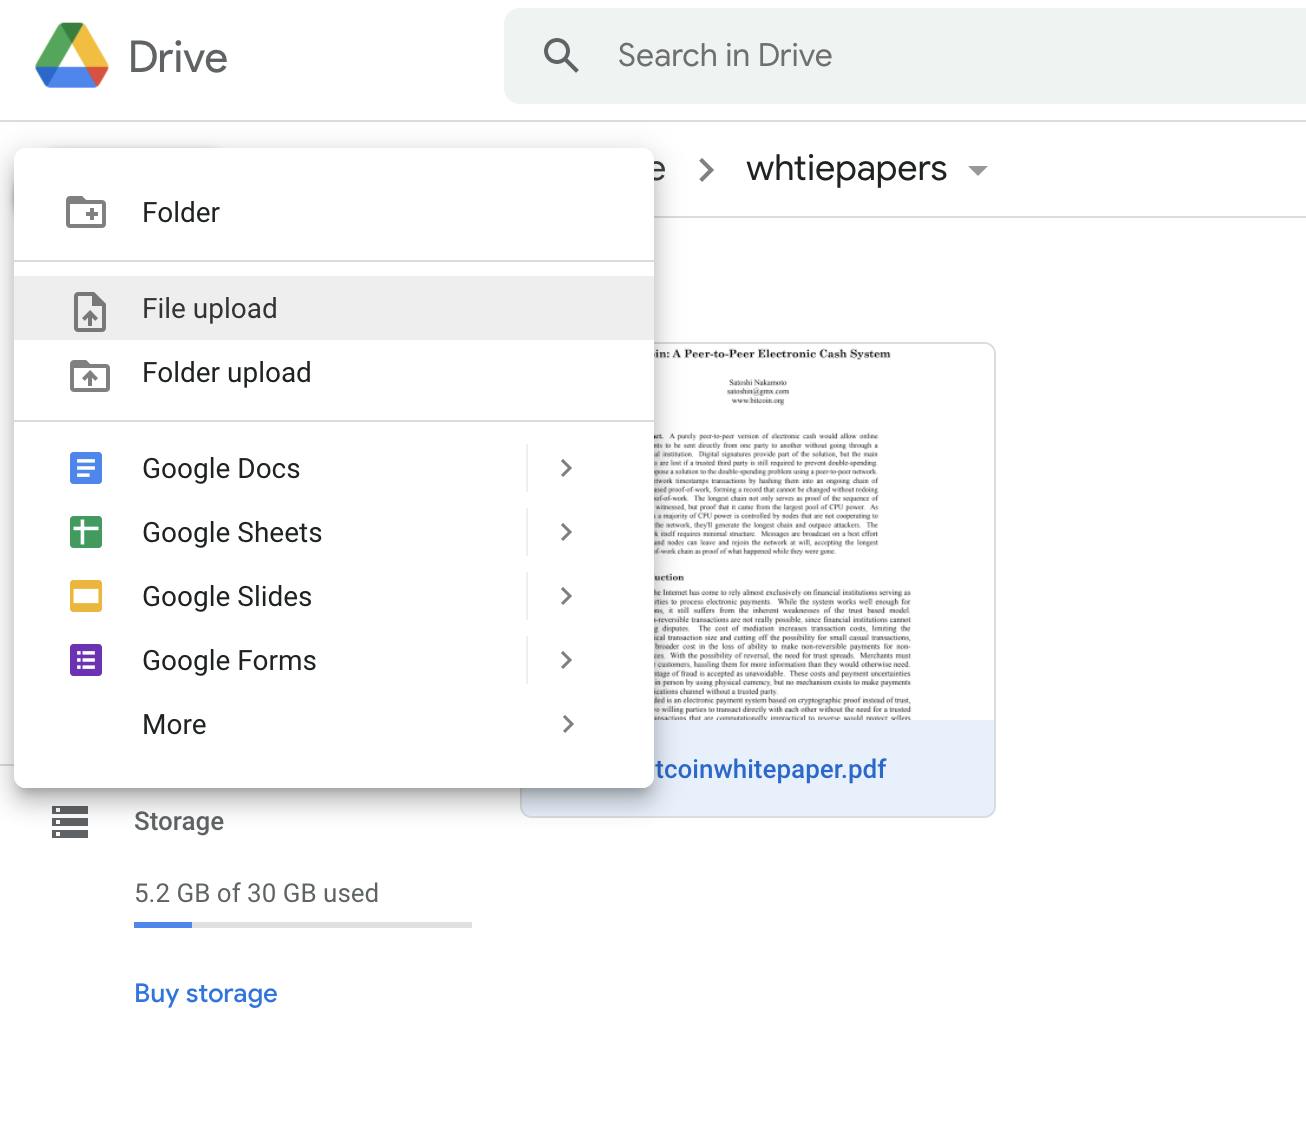 Upload a file to Google Drive